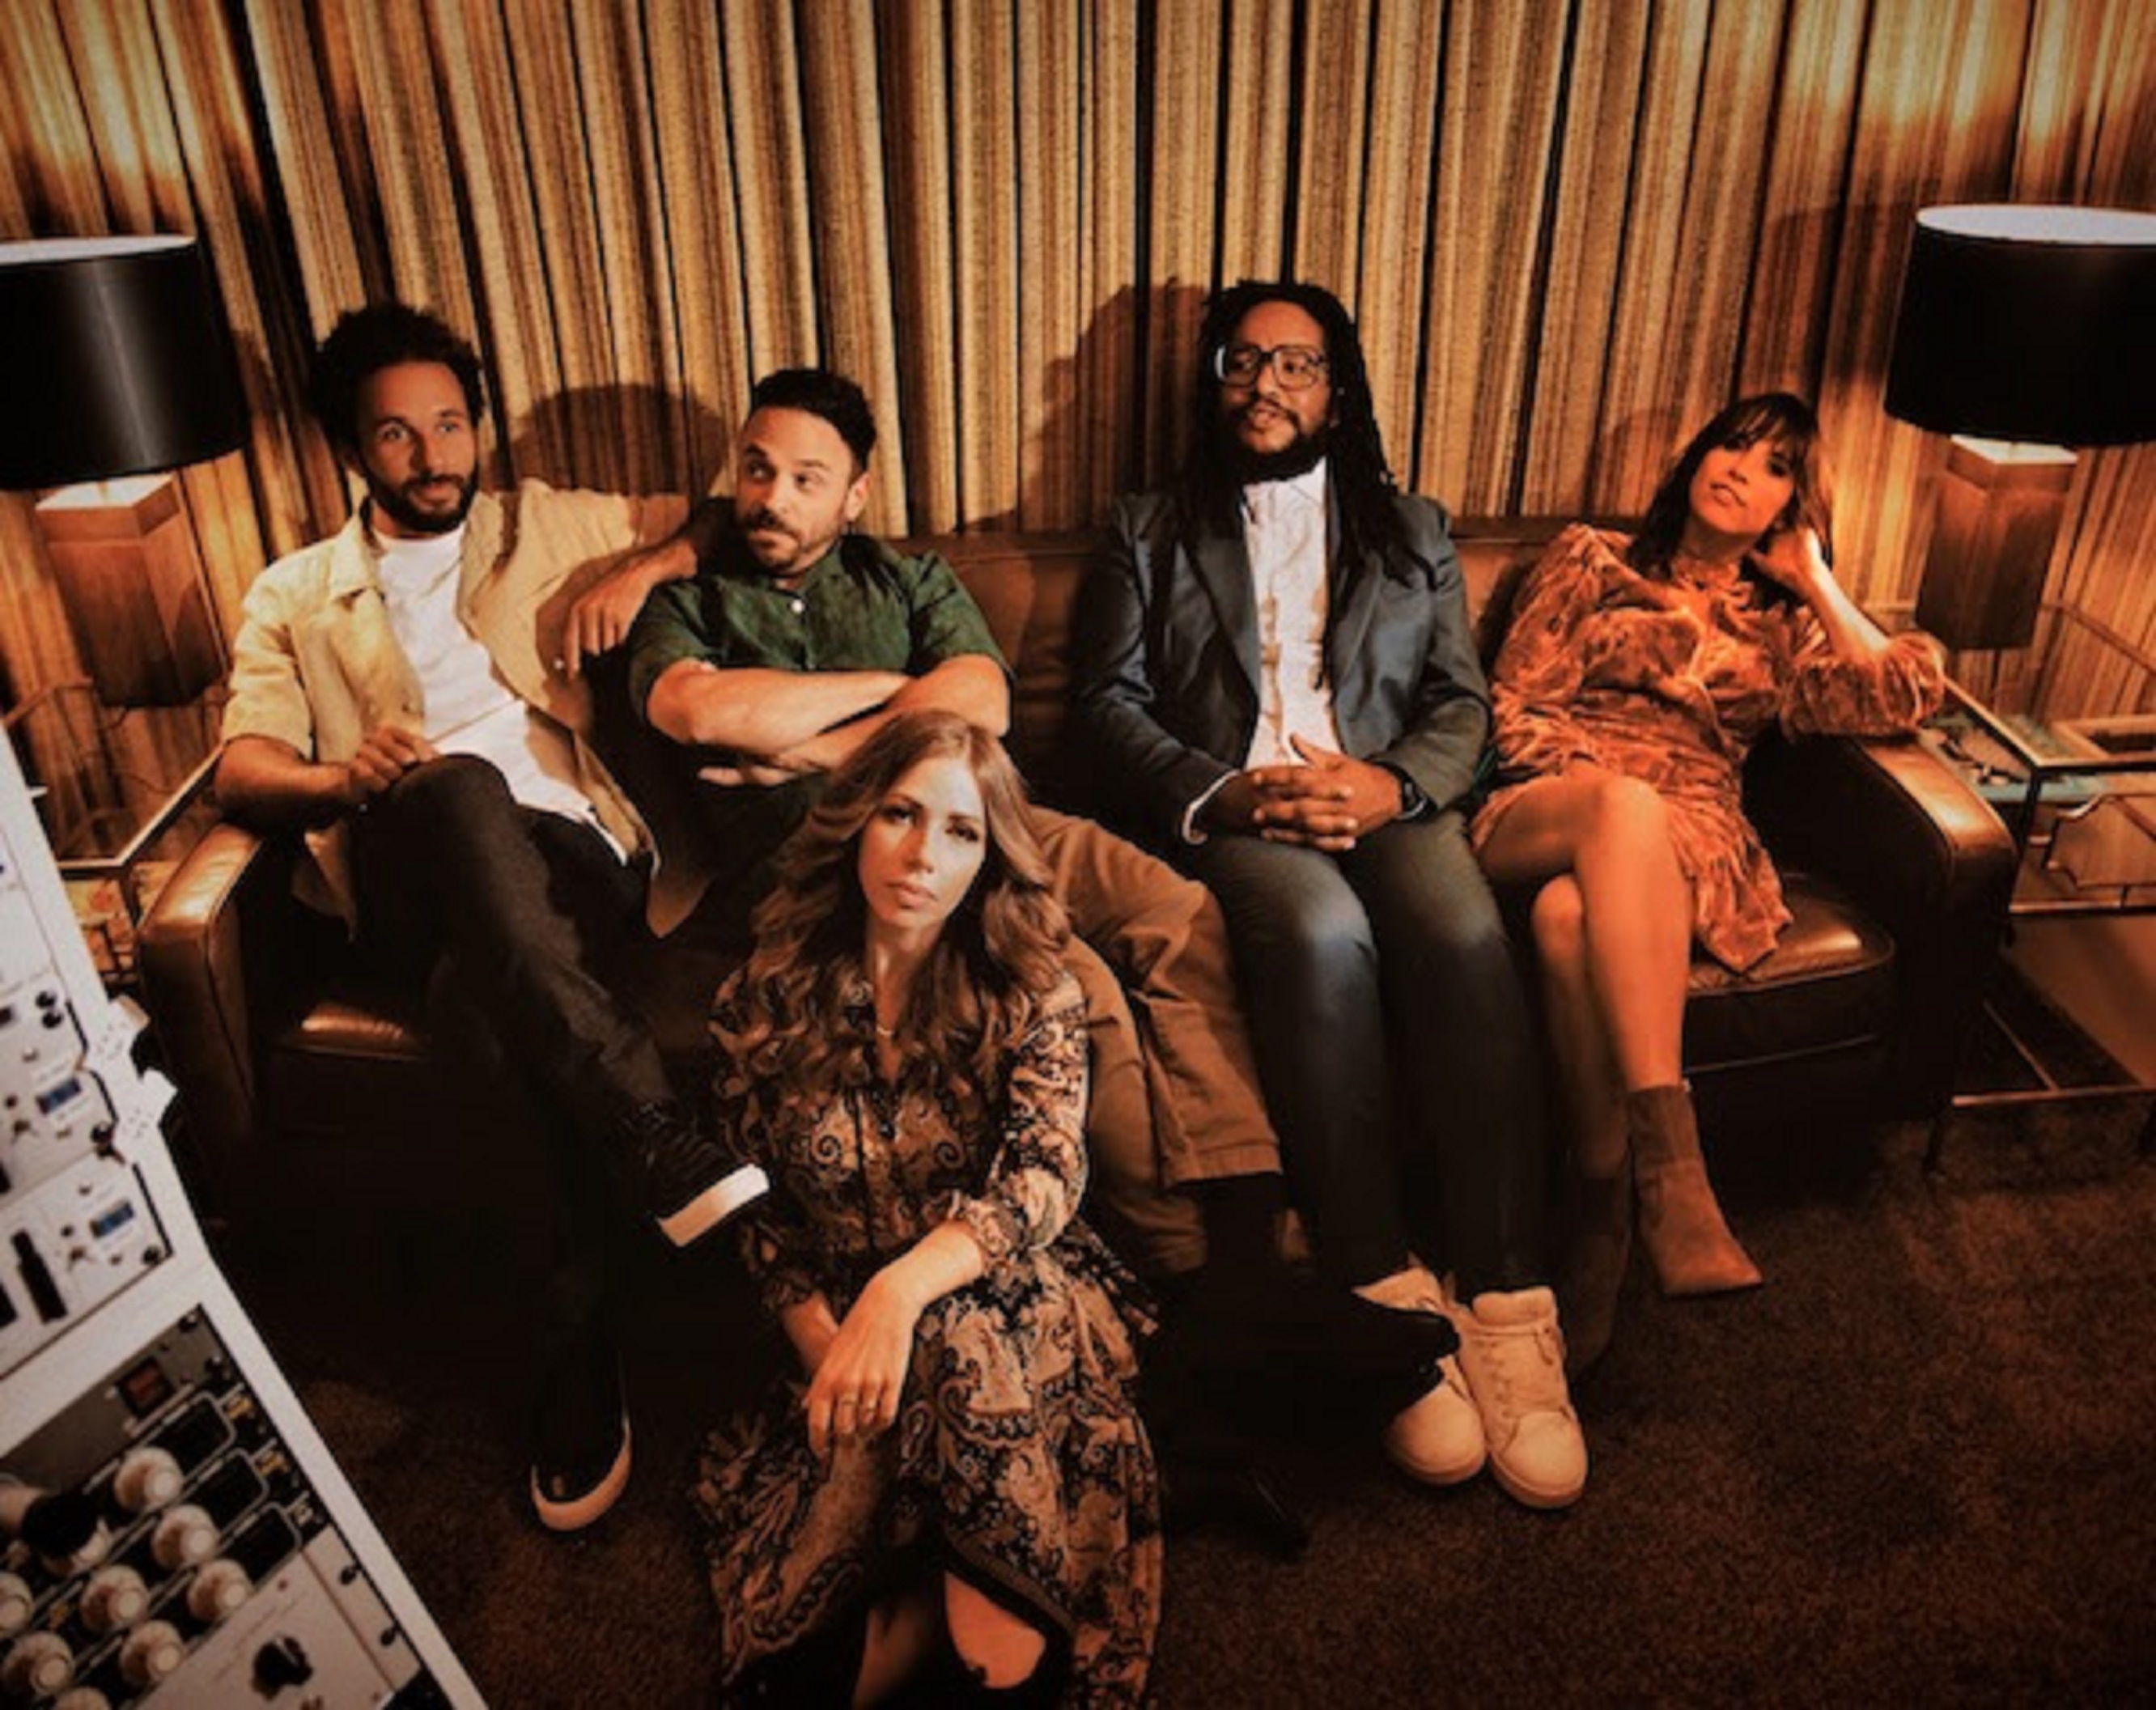 Lake Street Dive reveal new song "Twenty-Five," full LP Good Together out June 21 via Fantasy Records